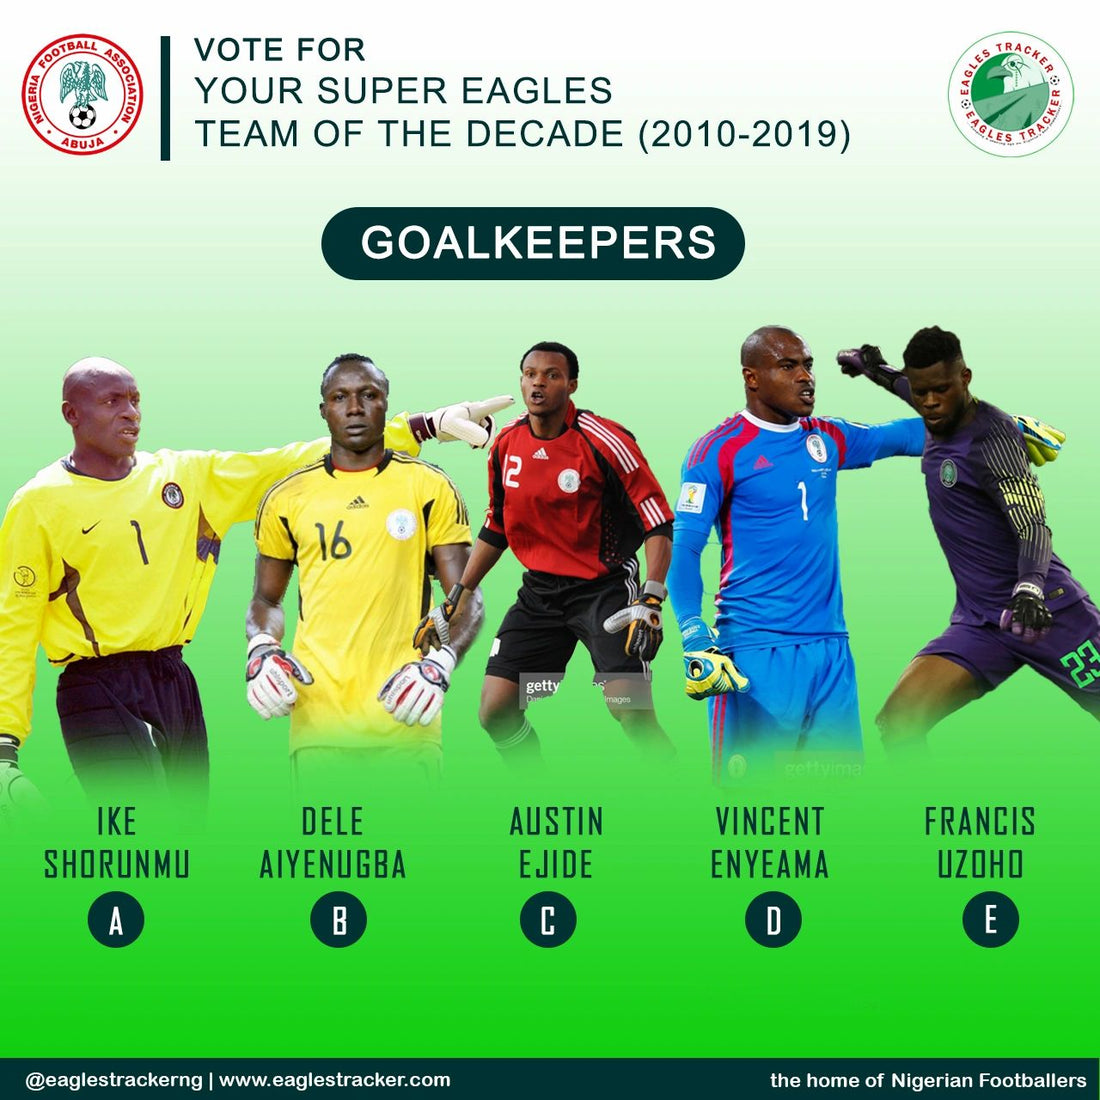 VOTE FOR YOUR SUPER EAGLES TEAM OF THE DECADE (GOALKEEPER)